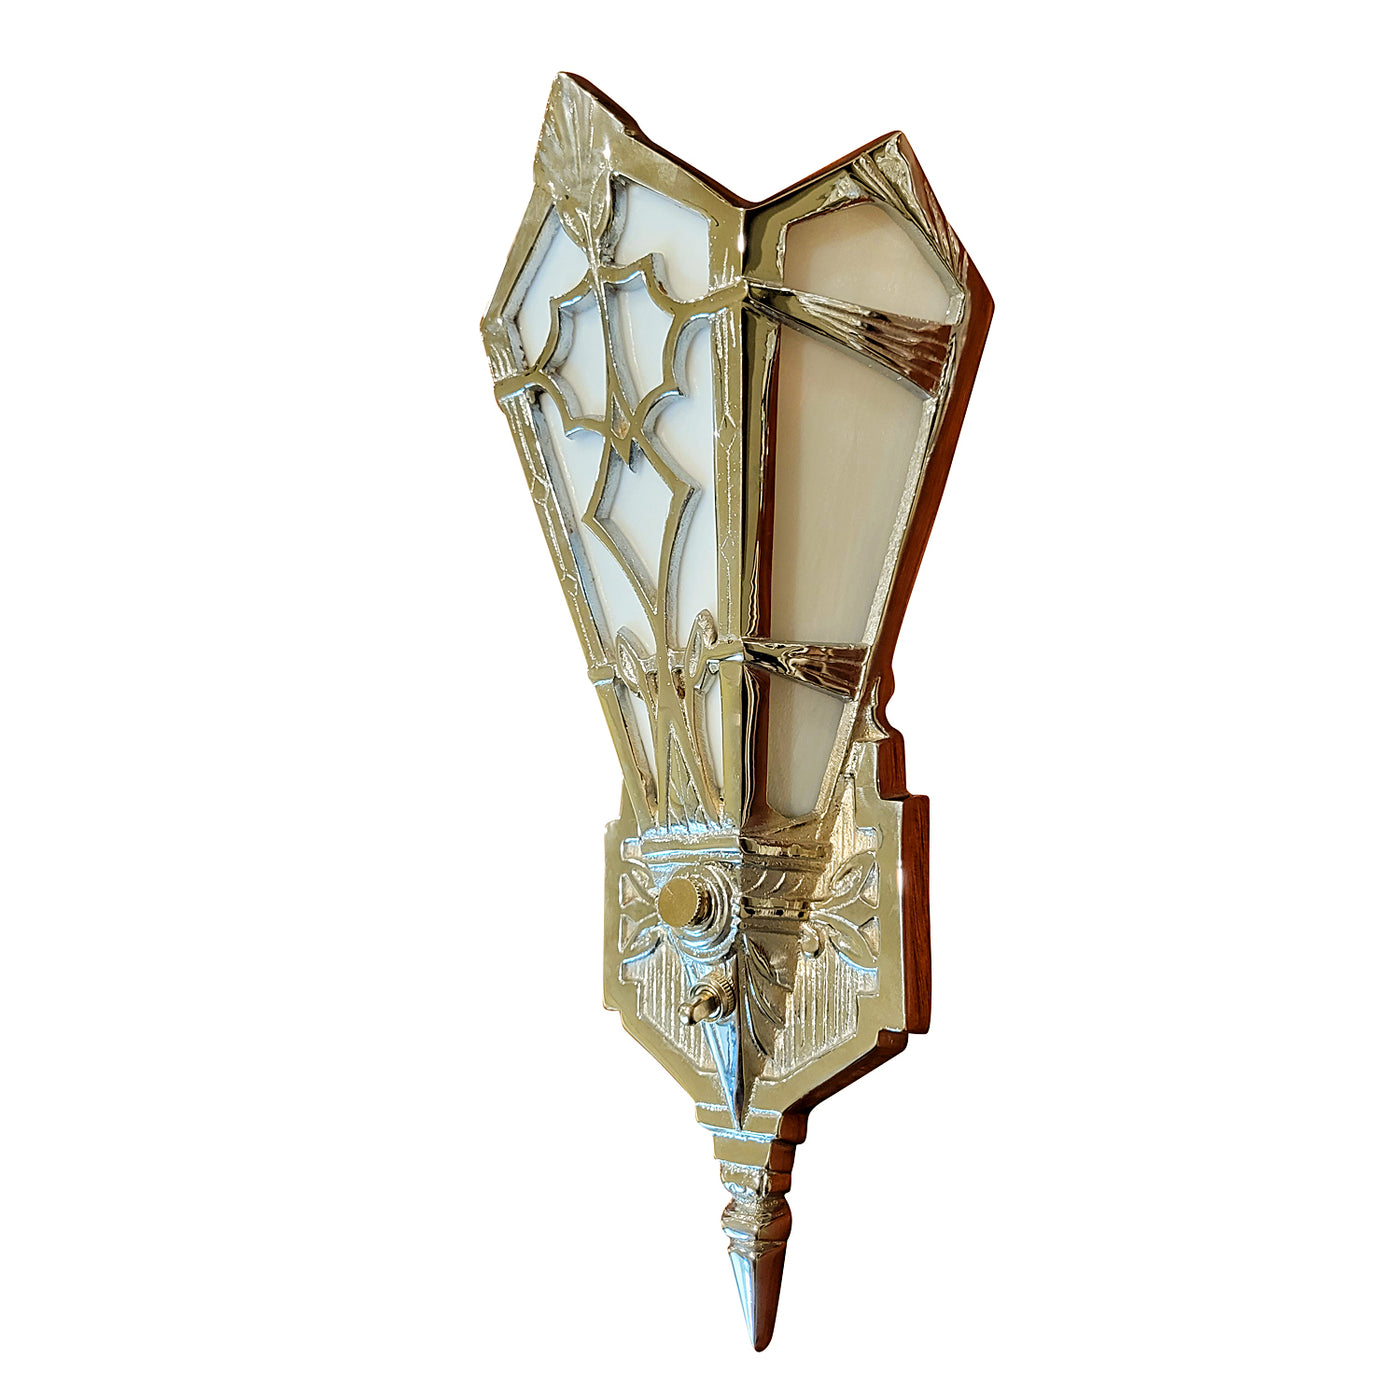 14 Inch Art Deco Stained Glass Shade White Opalescent Wall Sconce in Polished Chrome